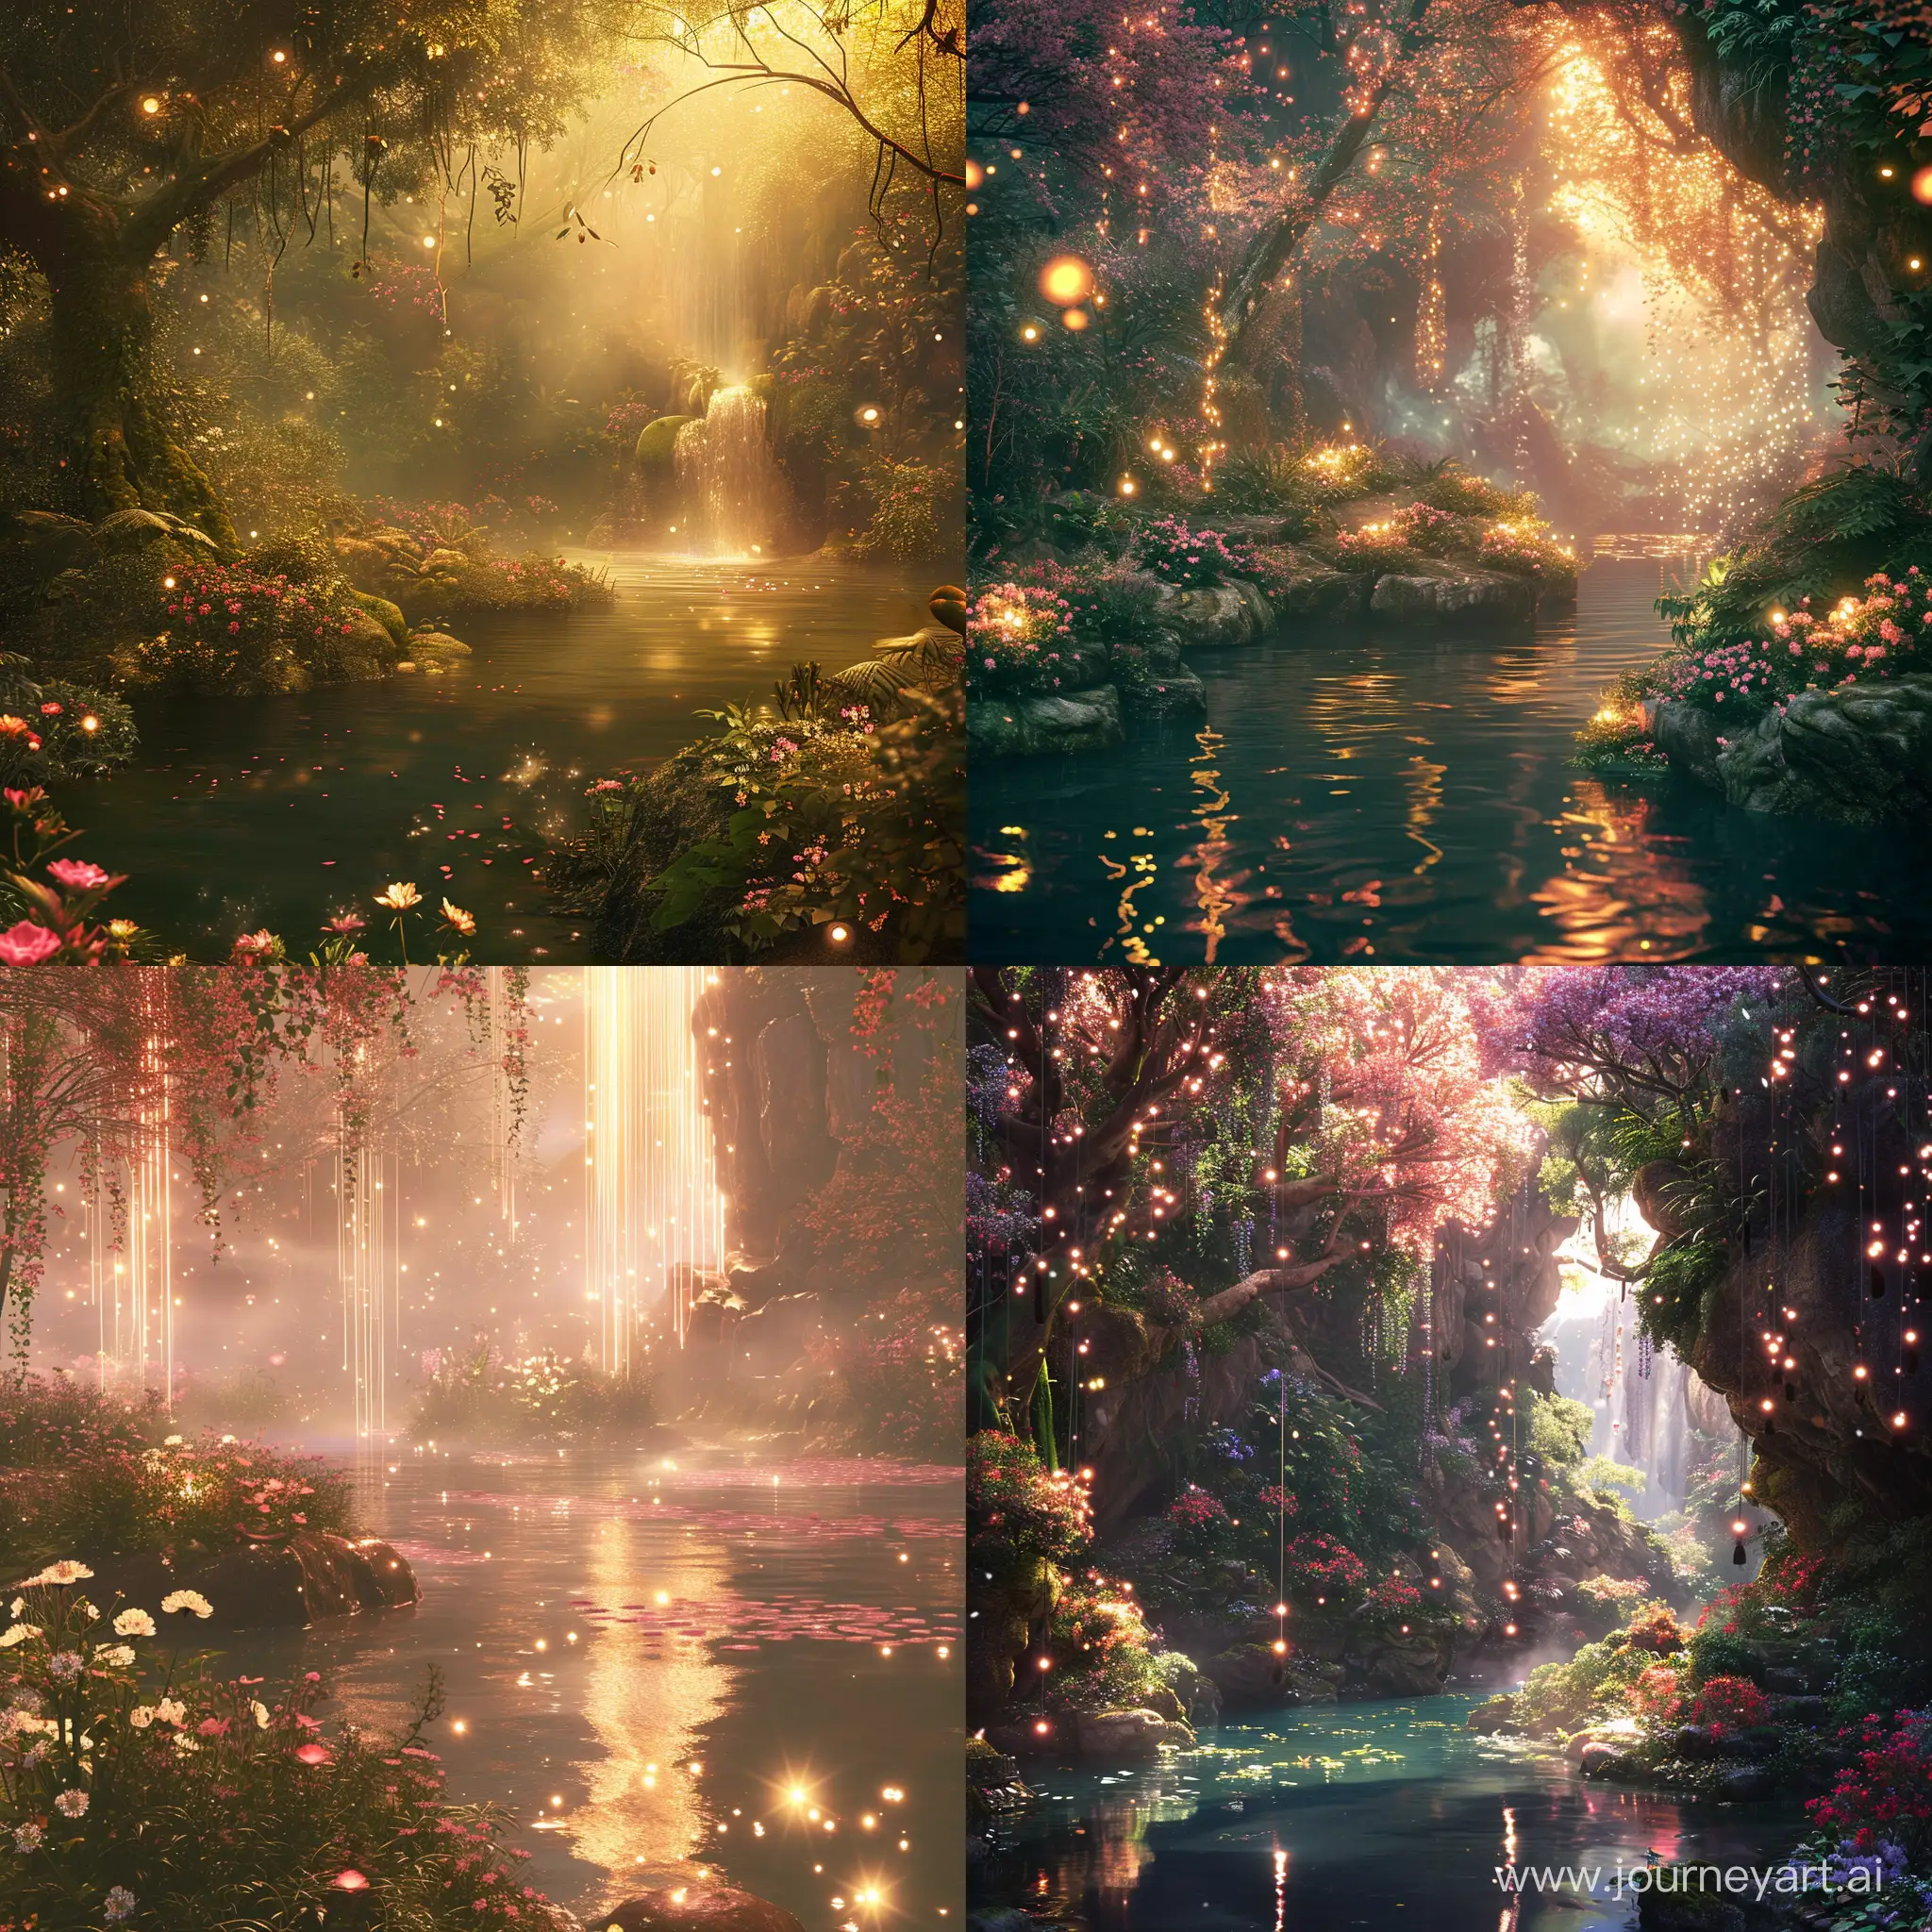 Mystical-Eastern-Eden-Tranquil-Rivers-Blooming-Flowers-and-Enchanting-Light